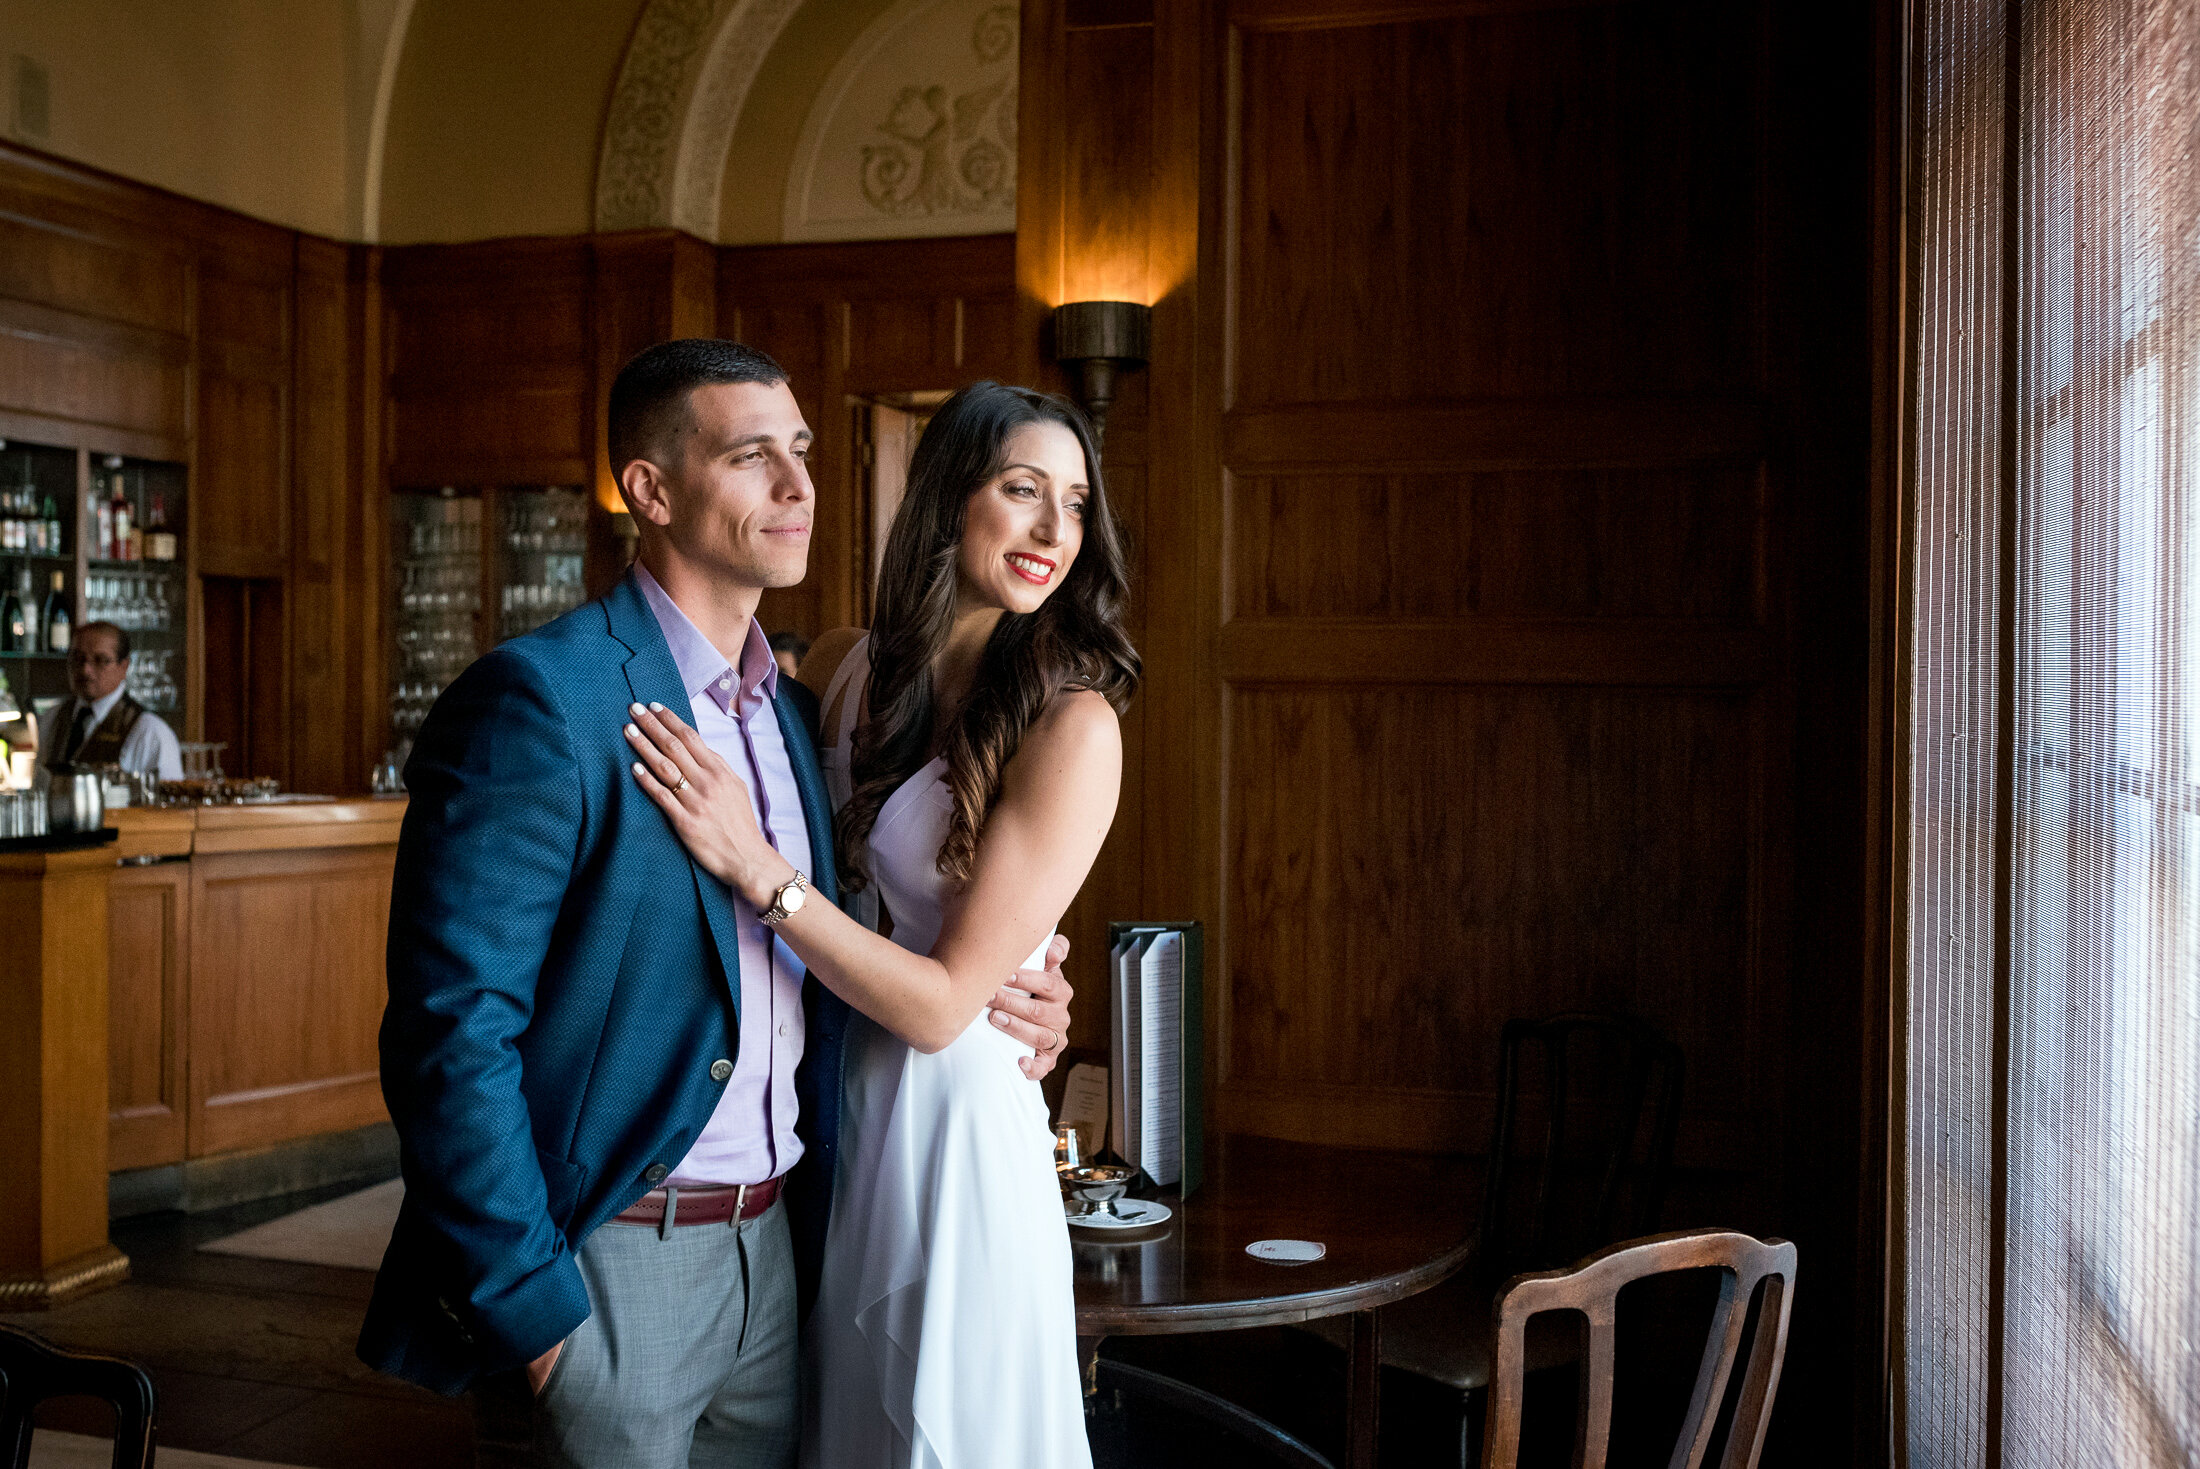  Engagement photography session at The Metropolitan Club in San Francisco, CA 